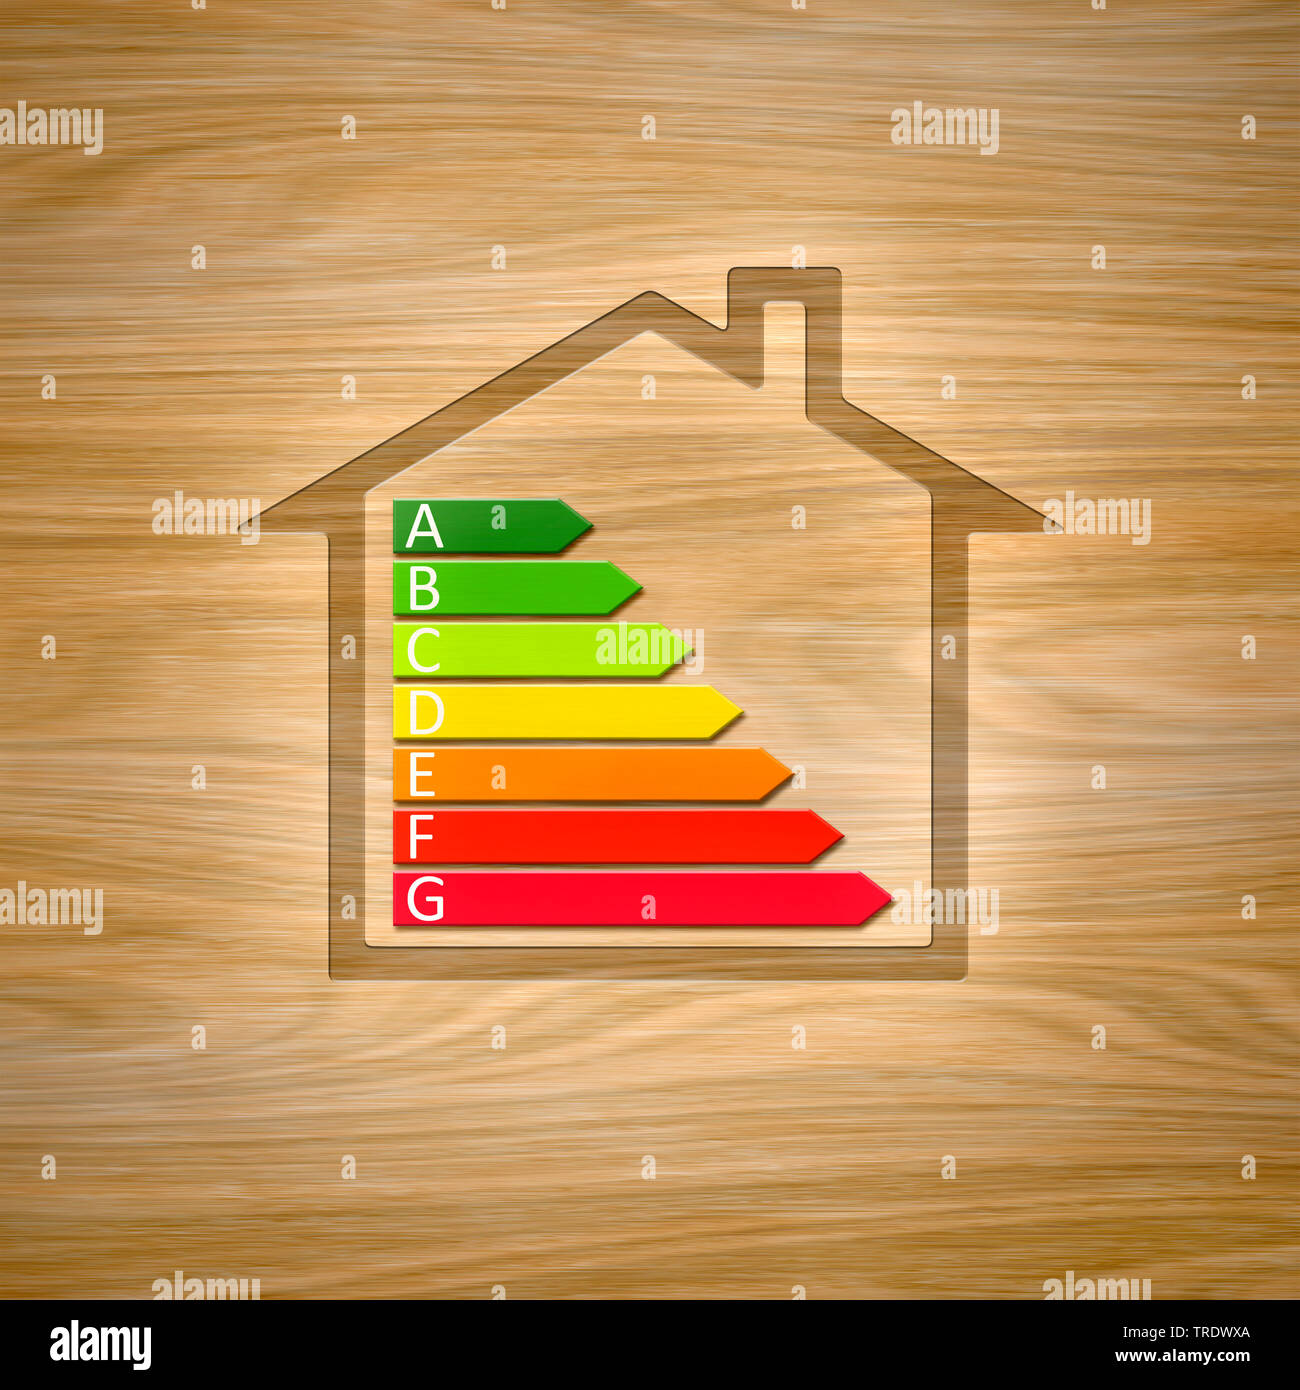 Sign of European Union energy label for a residental house against background out of wood veneer Stock Photo